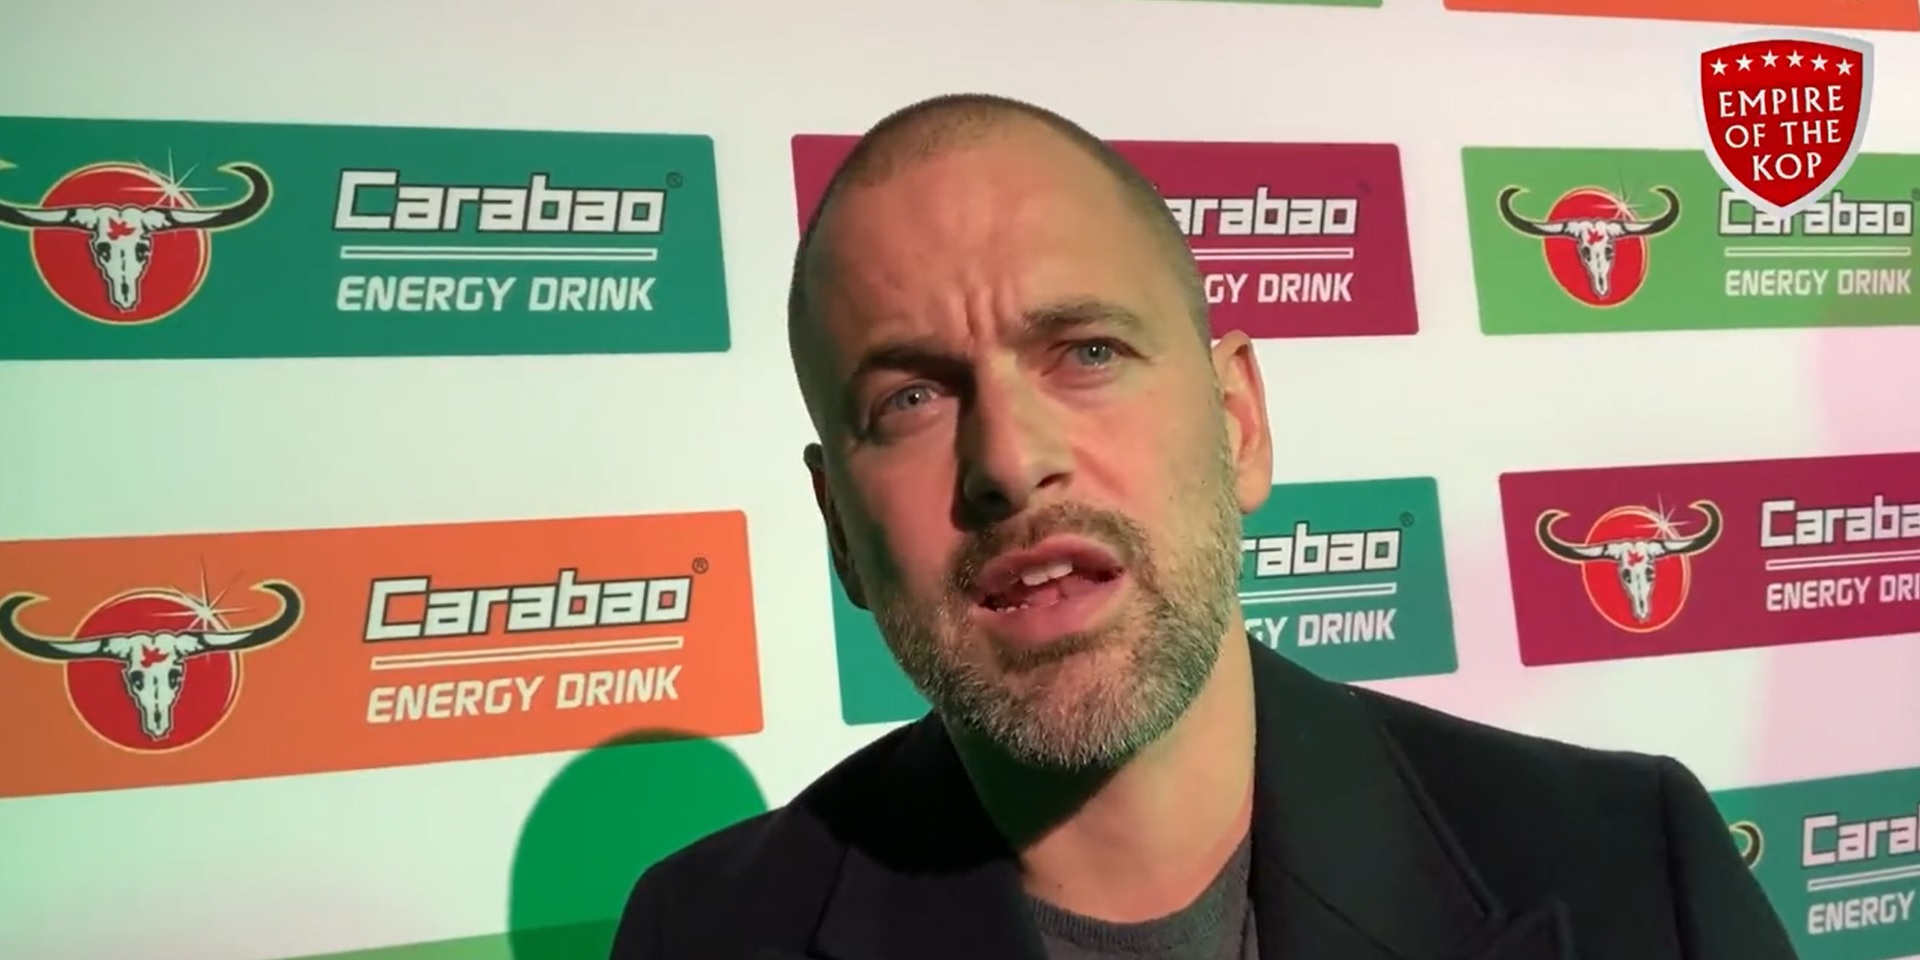 Joe Cole advises Chelsea on how they can exploit Liverpool weakness in Carabao Cup final